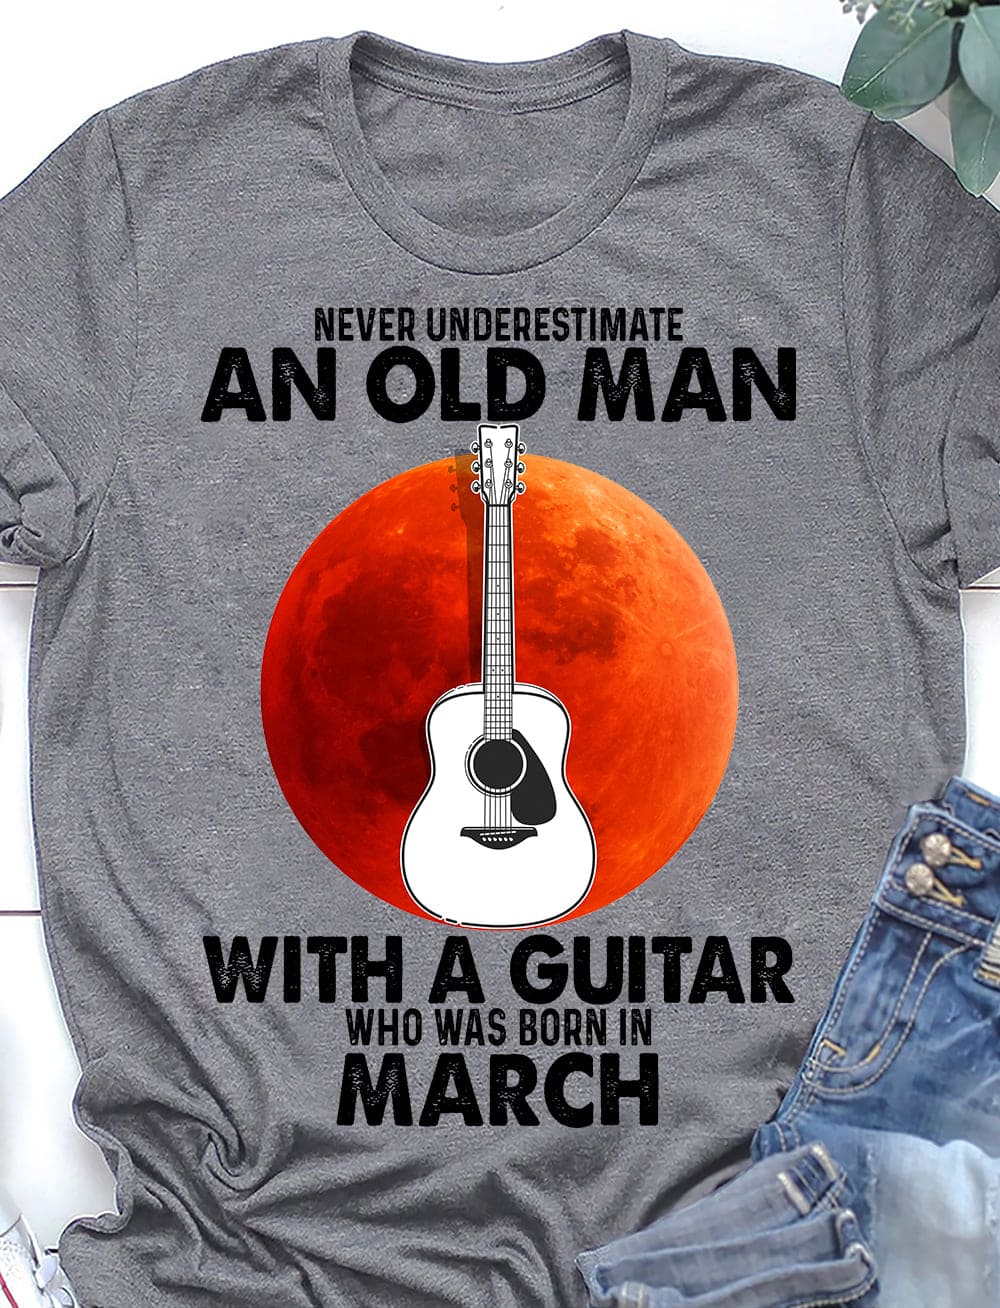 Never underestimate an old man with a guitar who was born in March - Gift for old guitarist